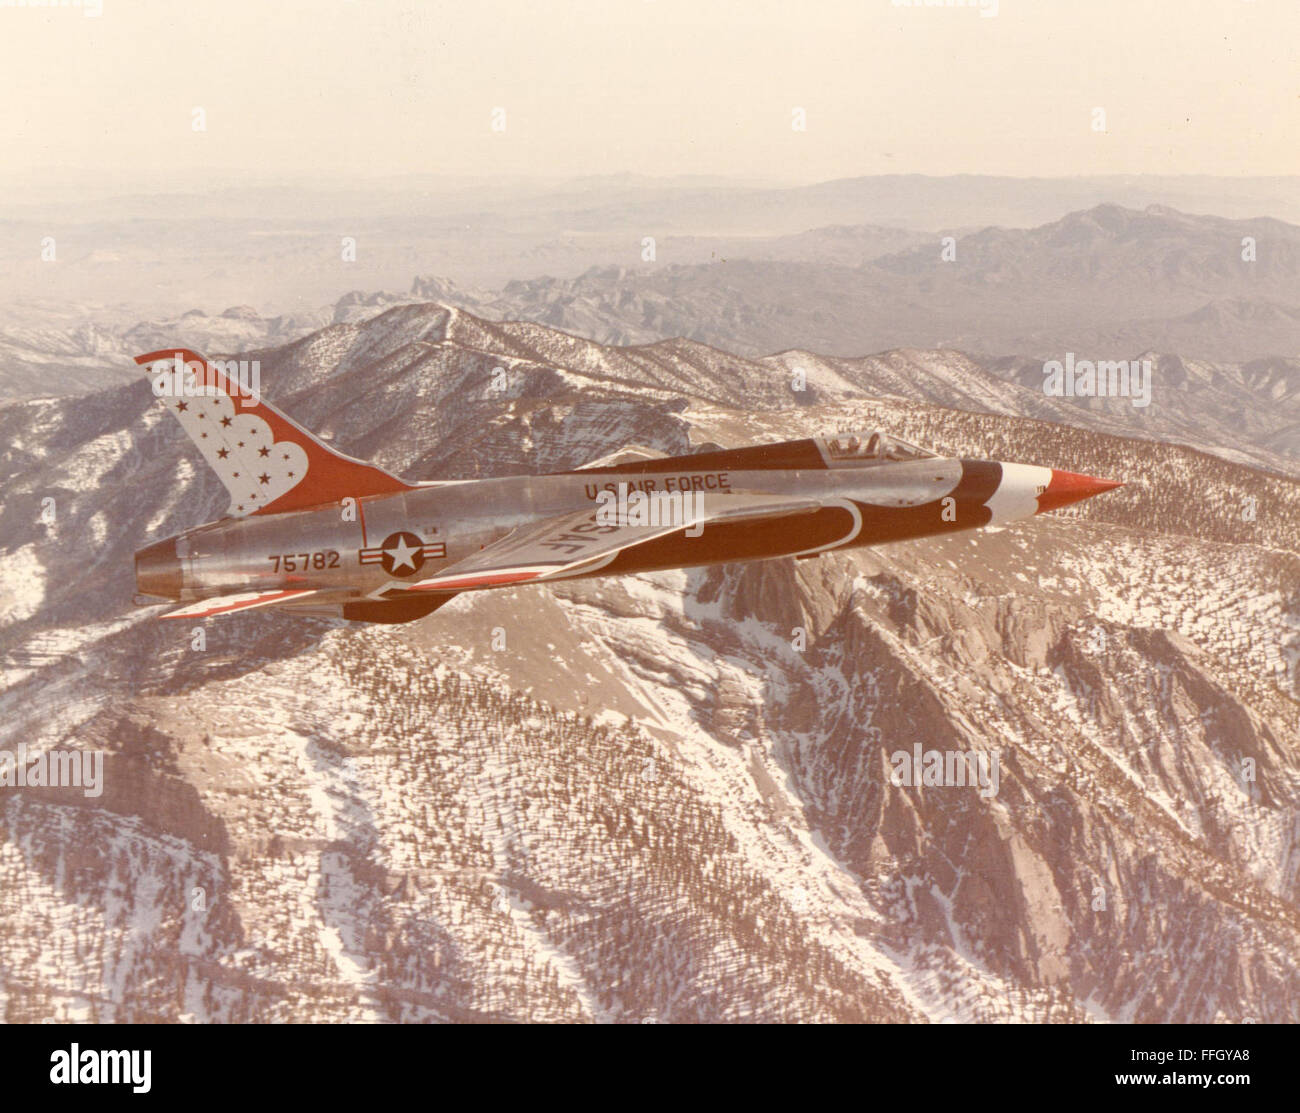 A Thunderbird F-105B “Thunderchief” in flight in 1964. The team switched to the F-105B for a brief period in 1964, after only performing six airshows in it. Instead of performing the extensive modifications to the F-105s transitioned to the F-100D 'Super Saber.' Stock Photo